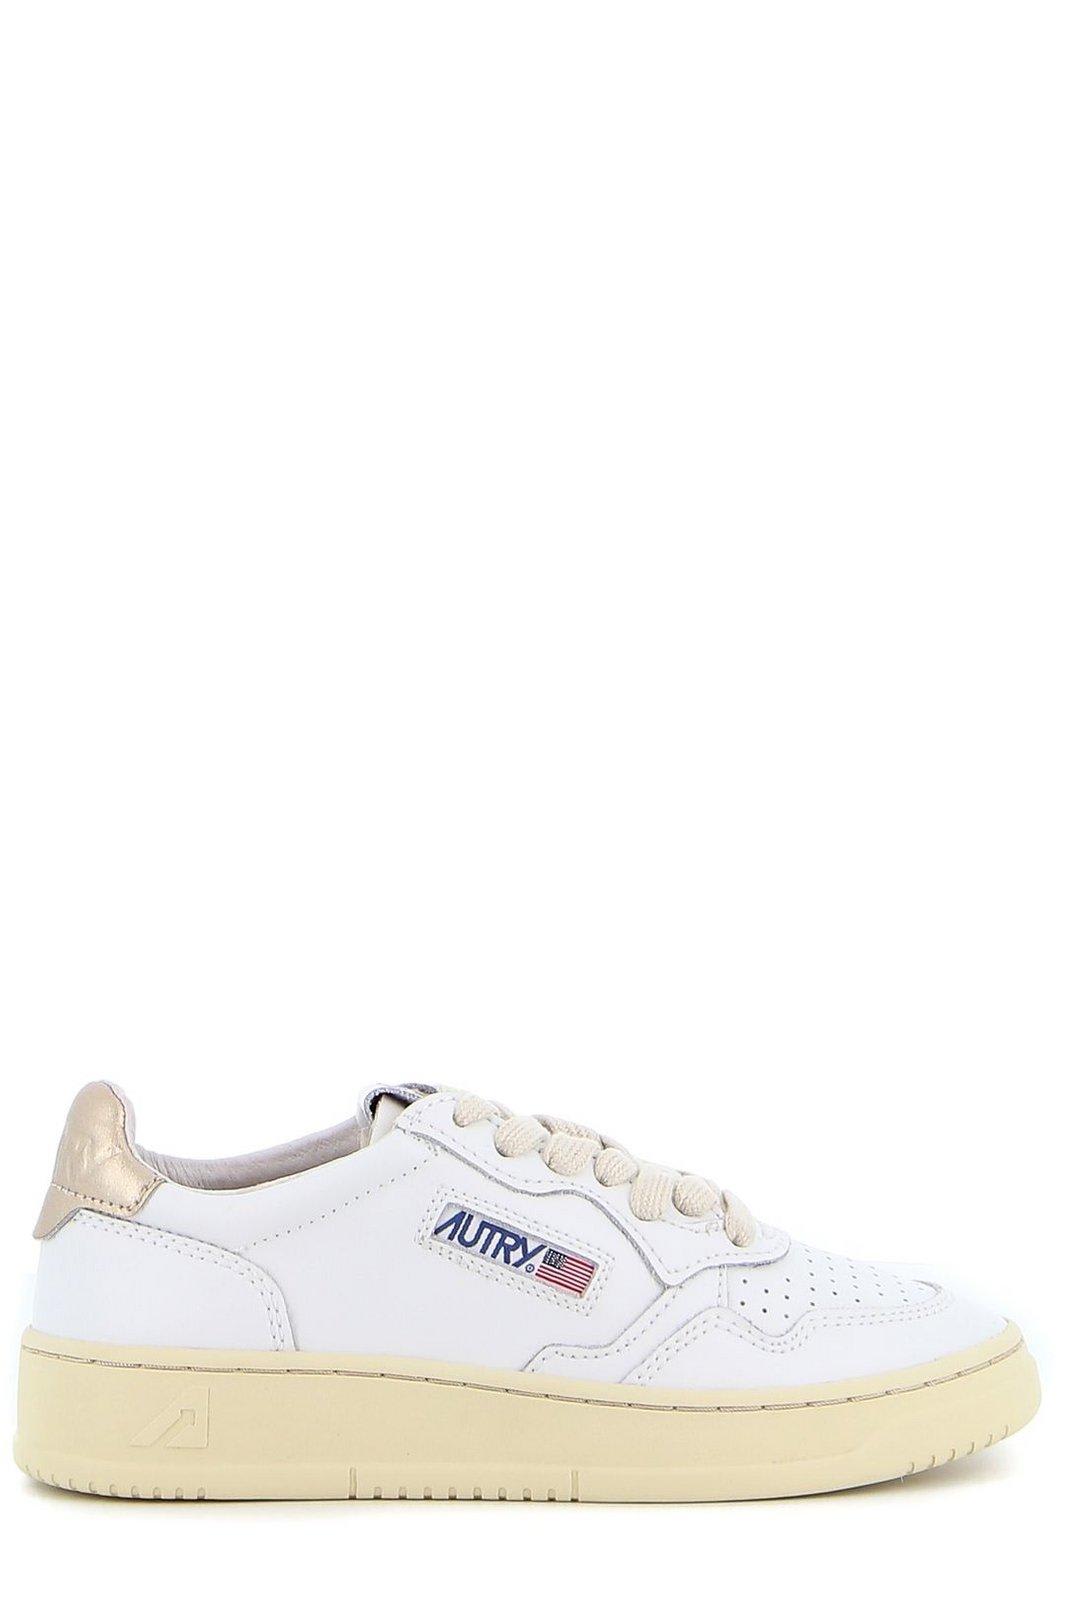 Autry Logo Patch Low-top Sneakers In White Gold